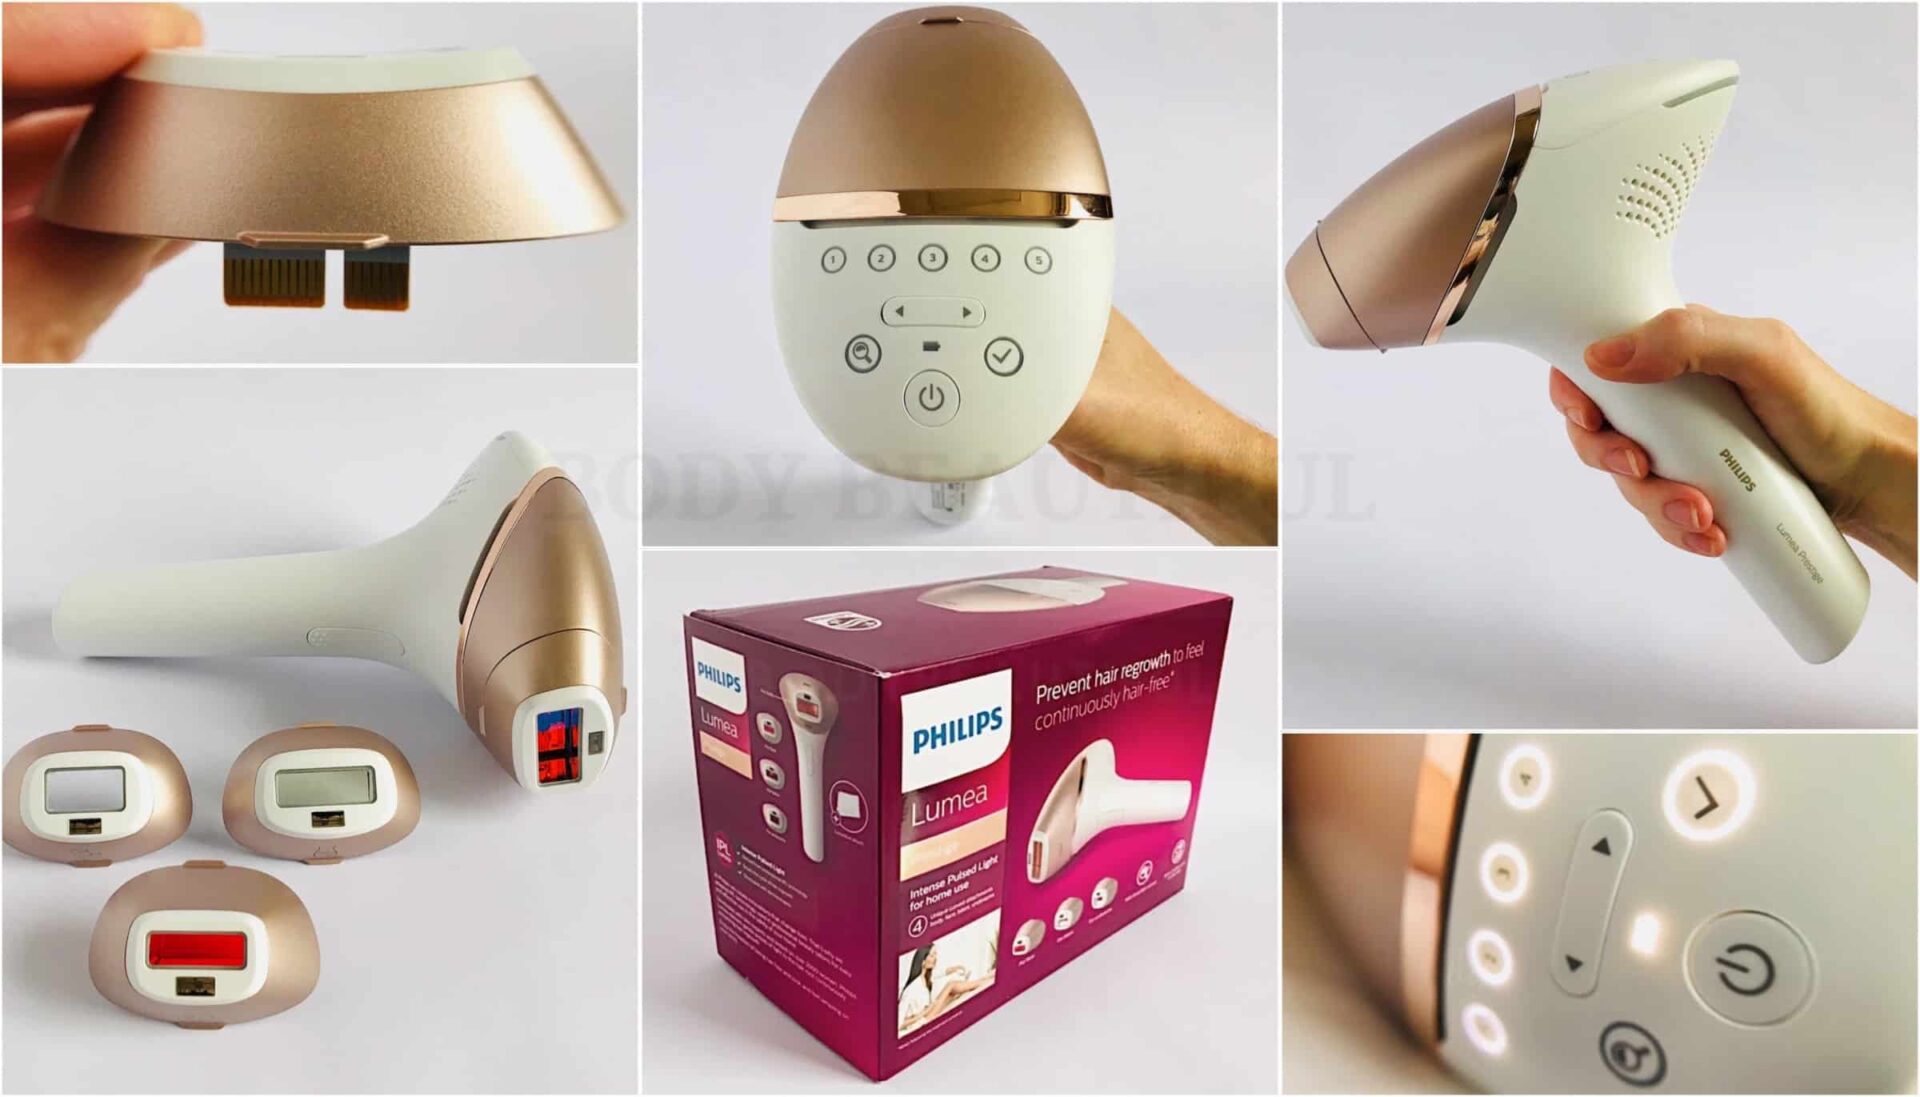 pillow Cusco participate Tried-&-tested Philips Lumea Prestige review & summary video